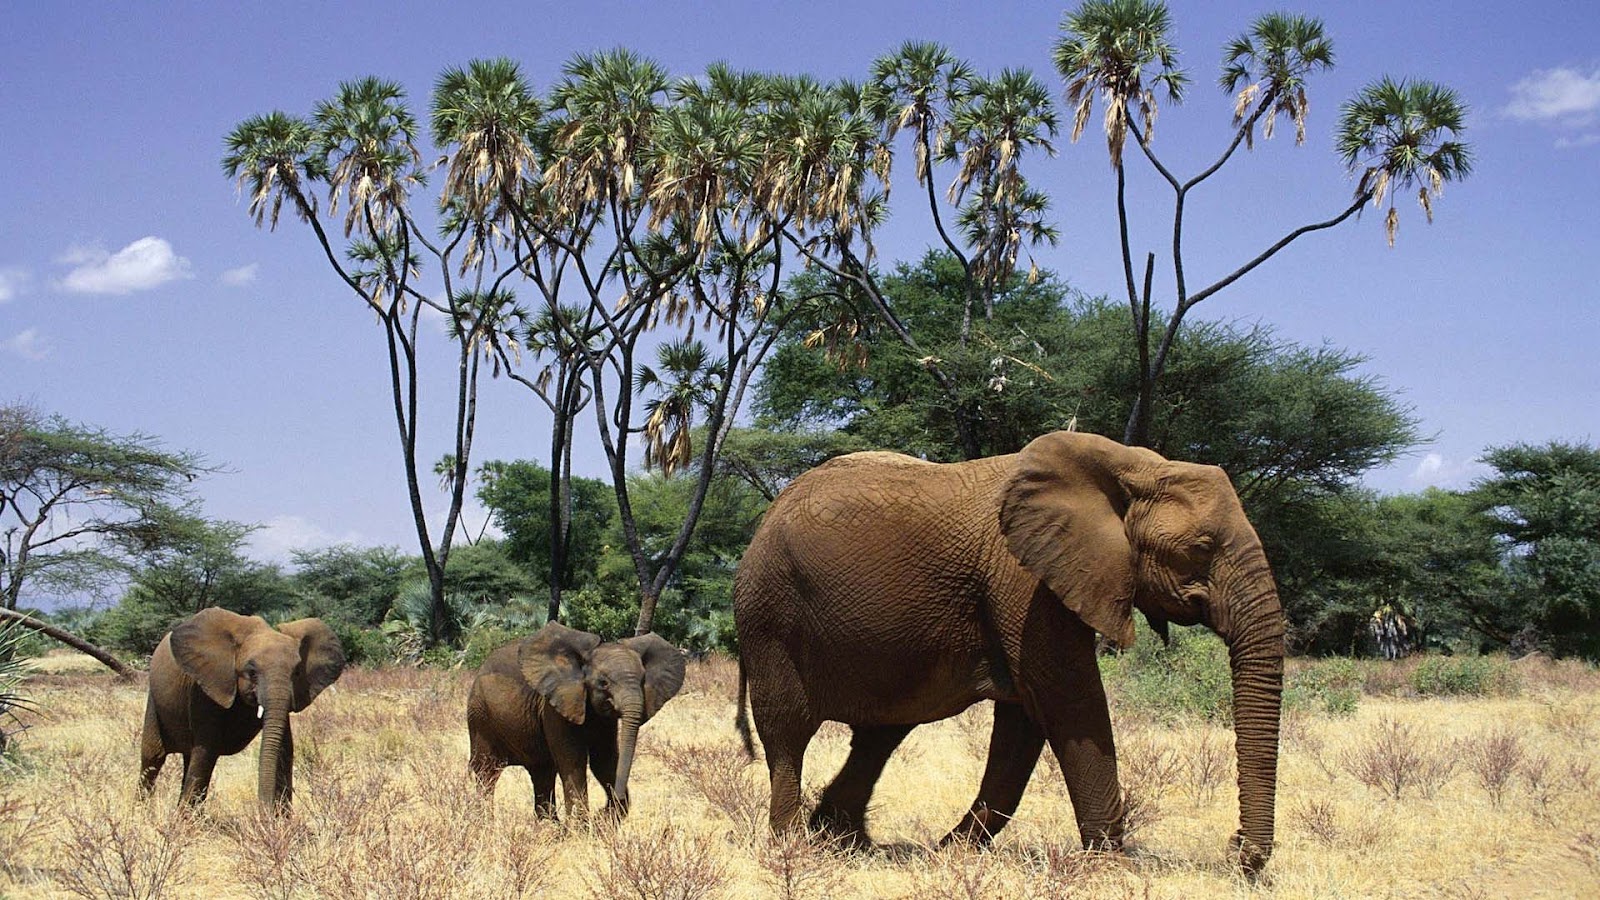 Elephants Wallpaper With Mother Elephant And His Young